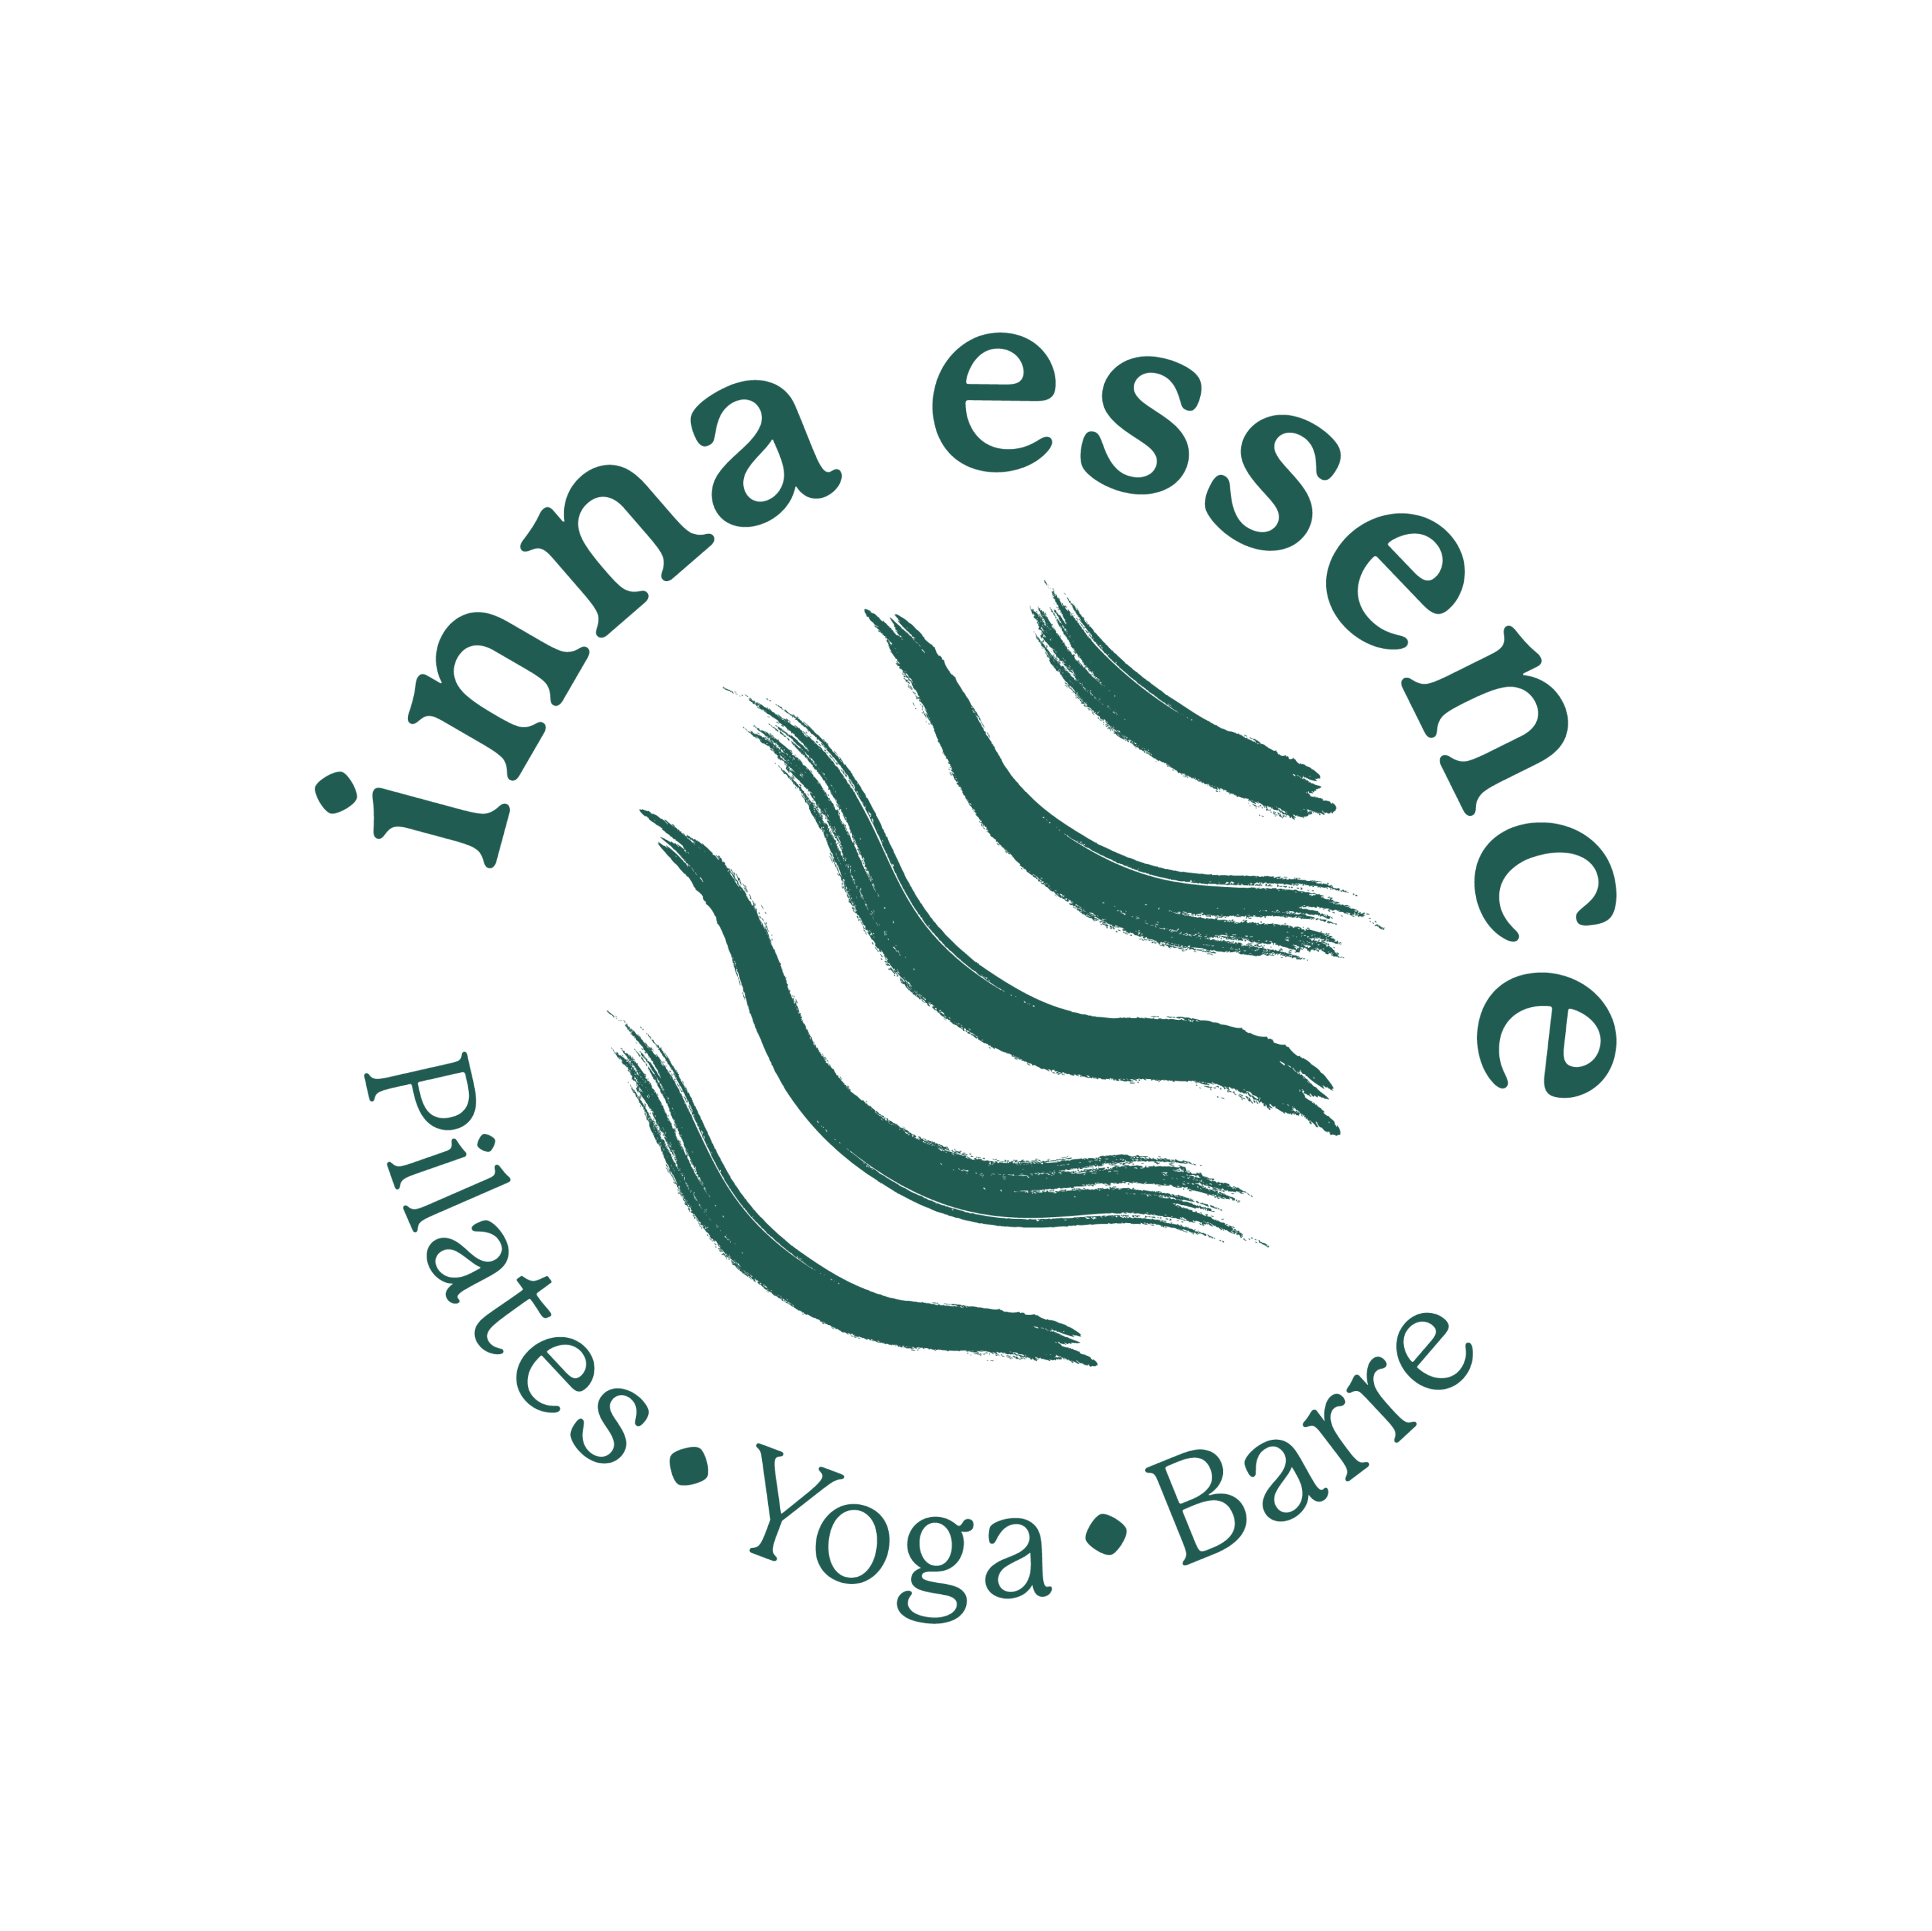 So many exciting events at Inna Essence